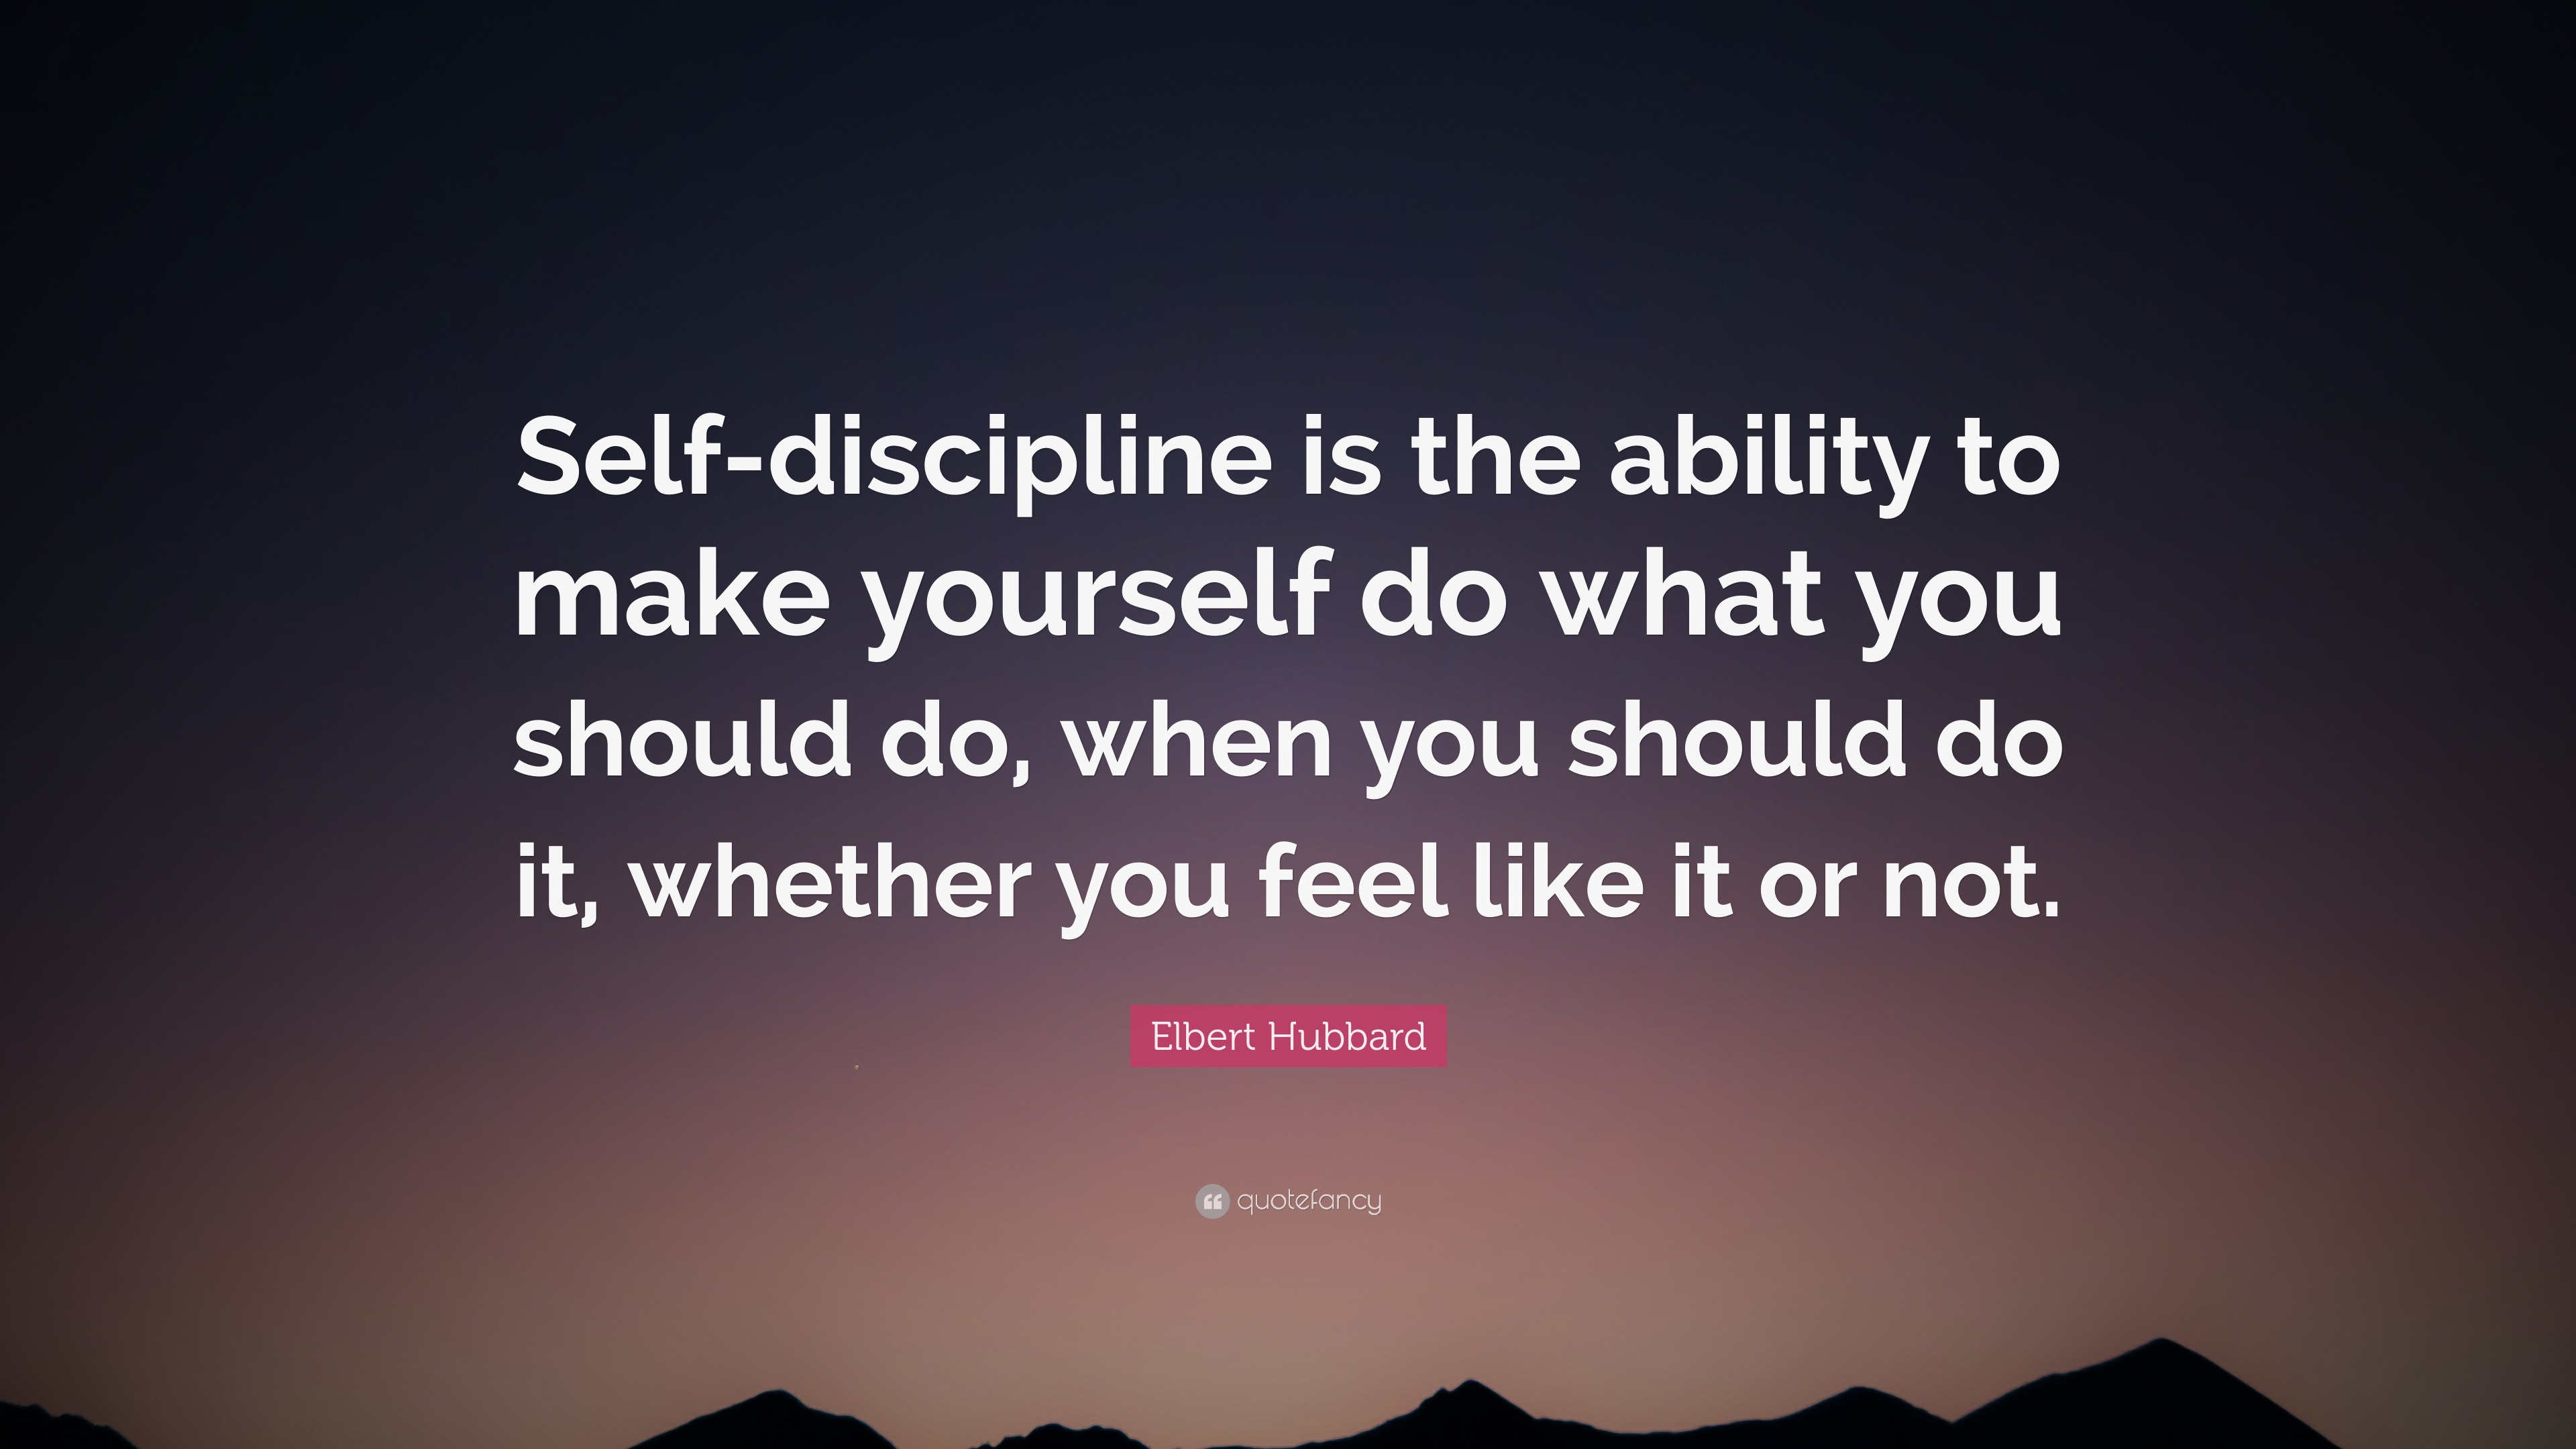 Elbert Hubbard Quote: “Self-discipline is the ability to make yourself ...